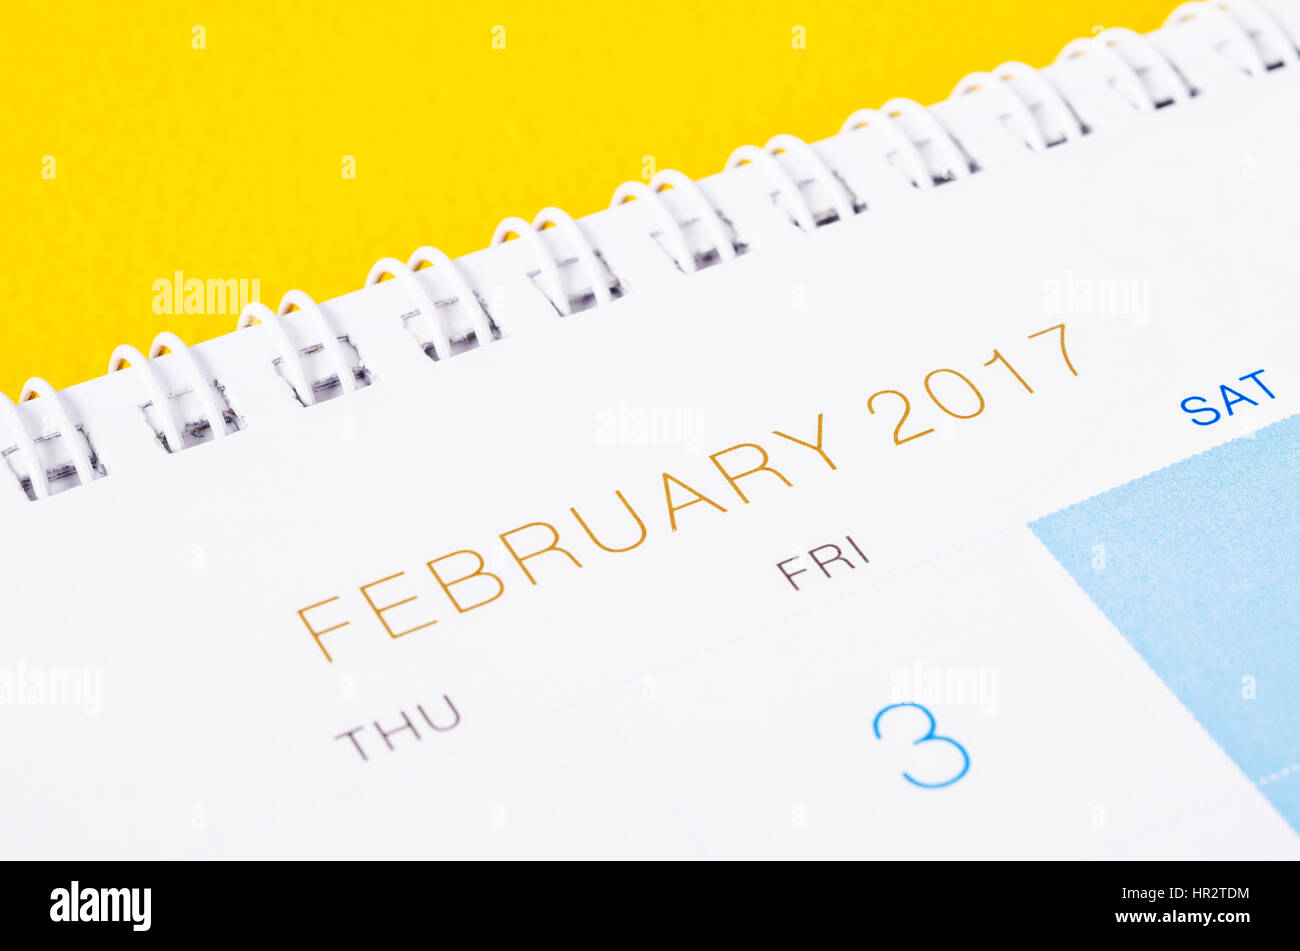 Desk top calendar February 2017 close up on yellow background. Stock Photo